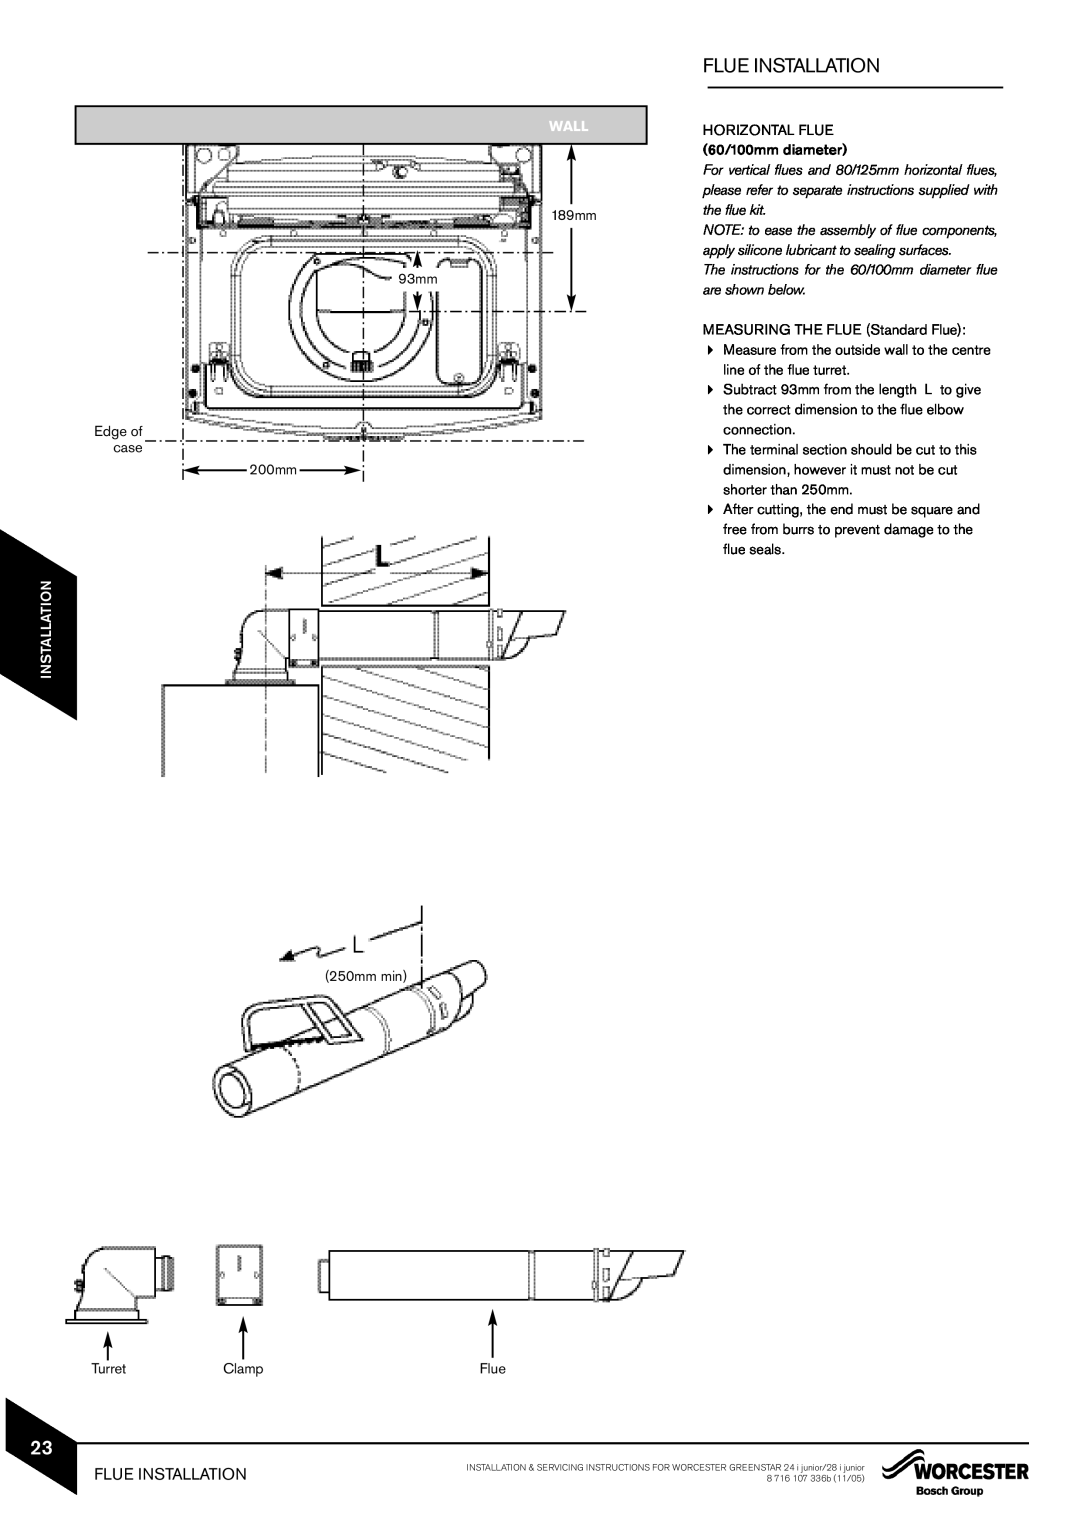 Bosch Appliances 28i junior manual Flue Installation, Wall, The instructions for the 60/100mm diameter flue are shown below 